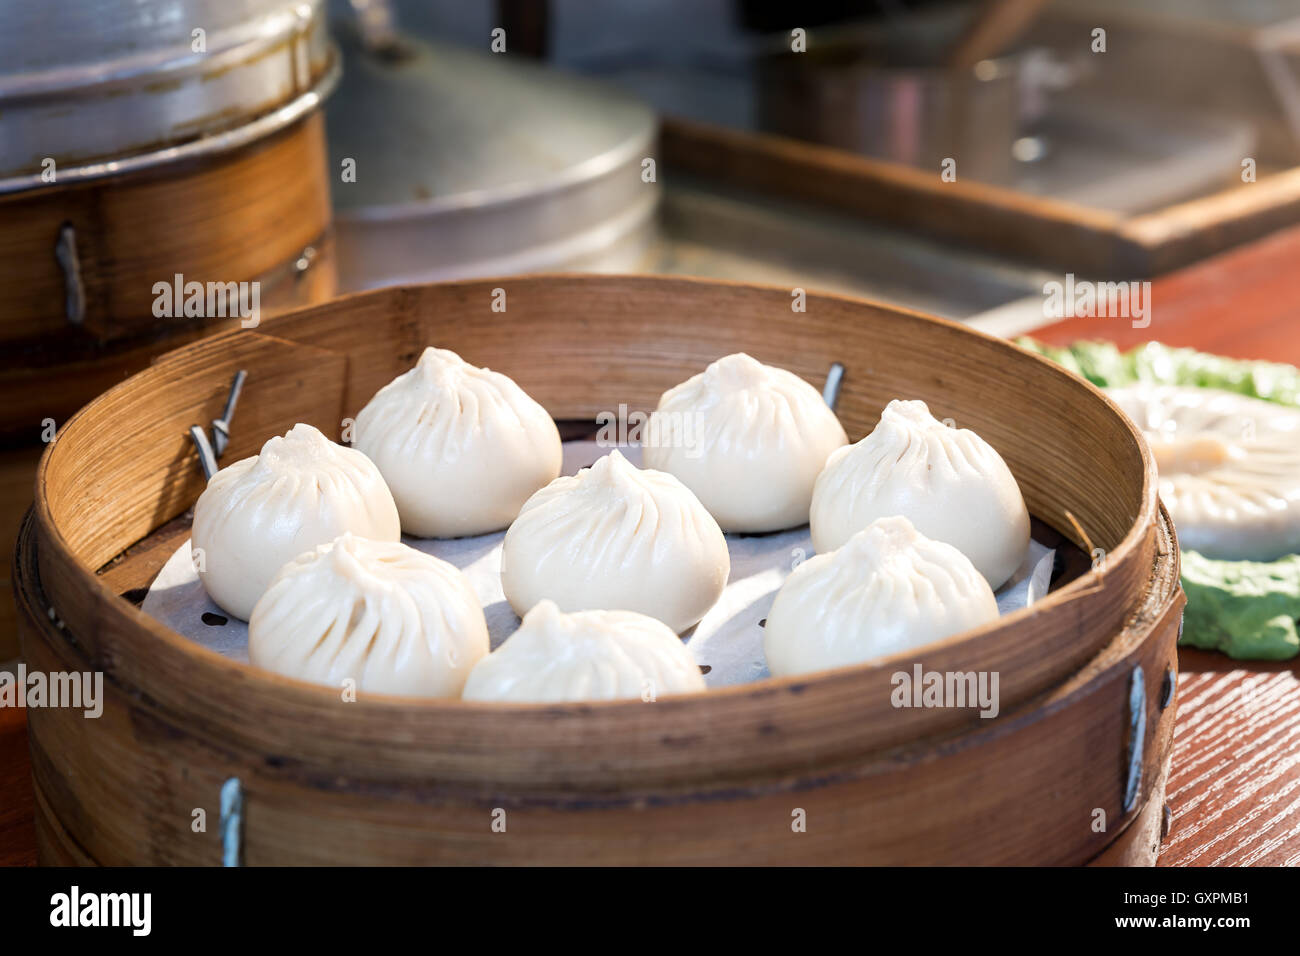 Chinese food steamed bun in bamboo basket in food market, Shanghai, China. Stock Photo